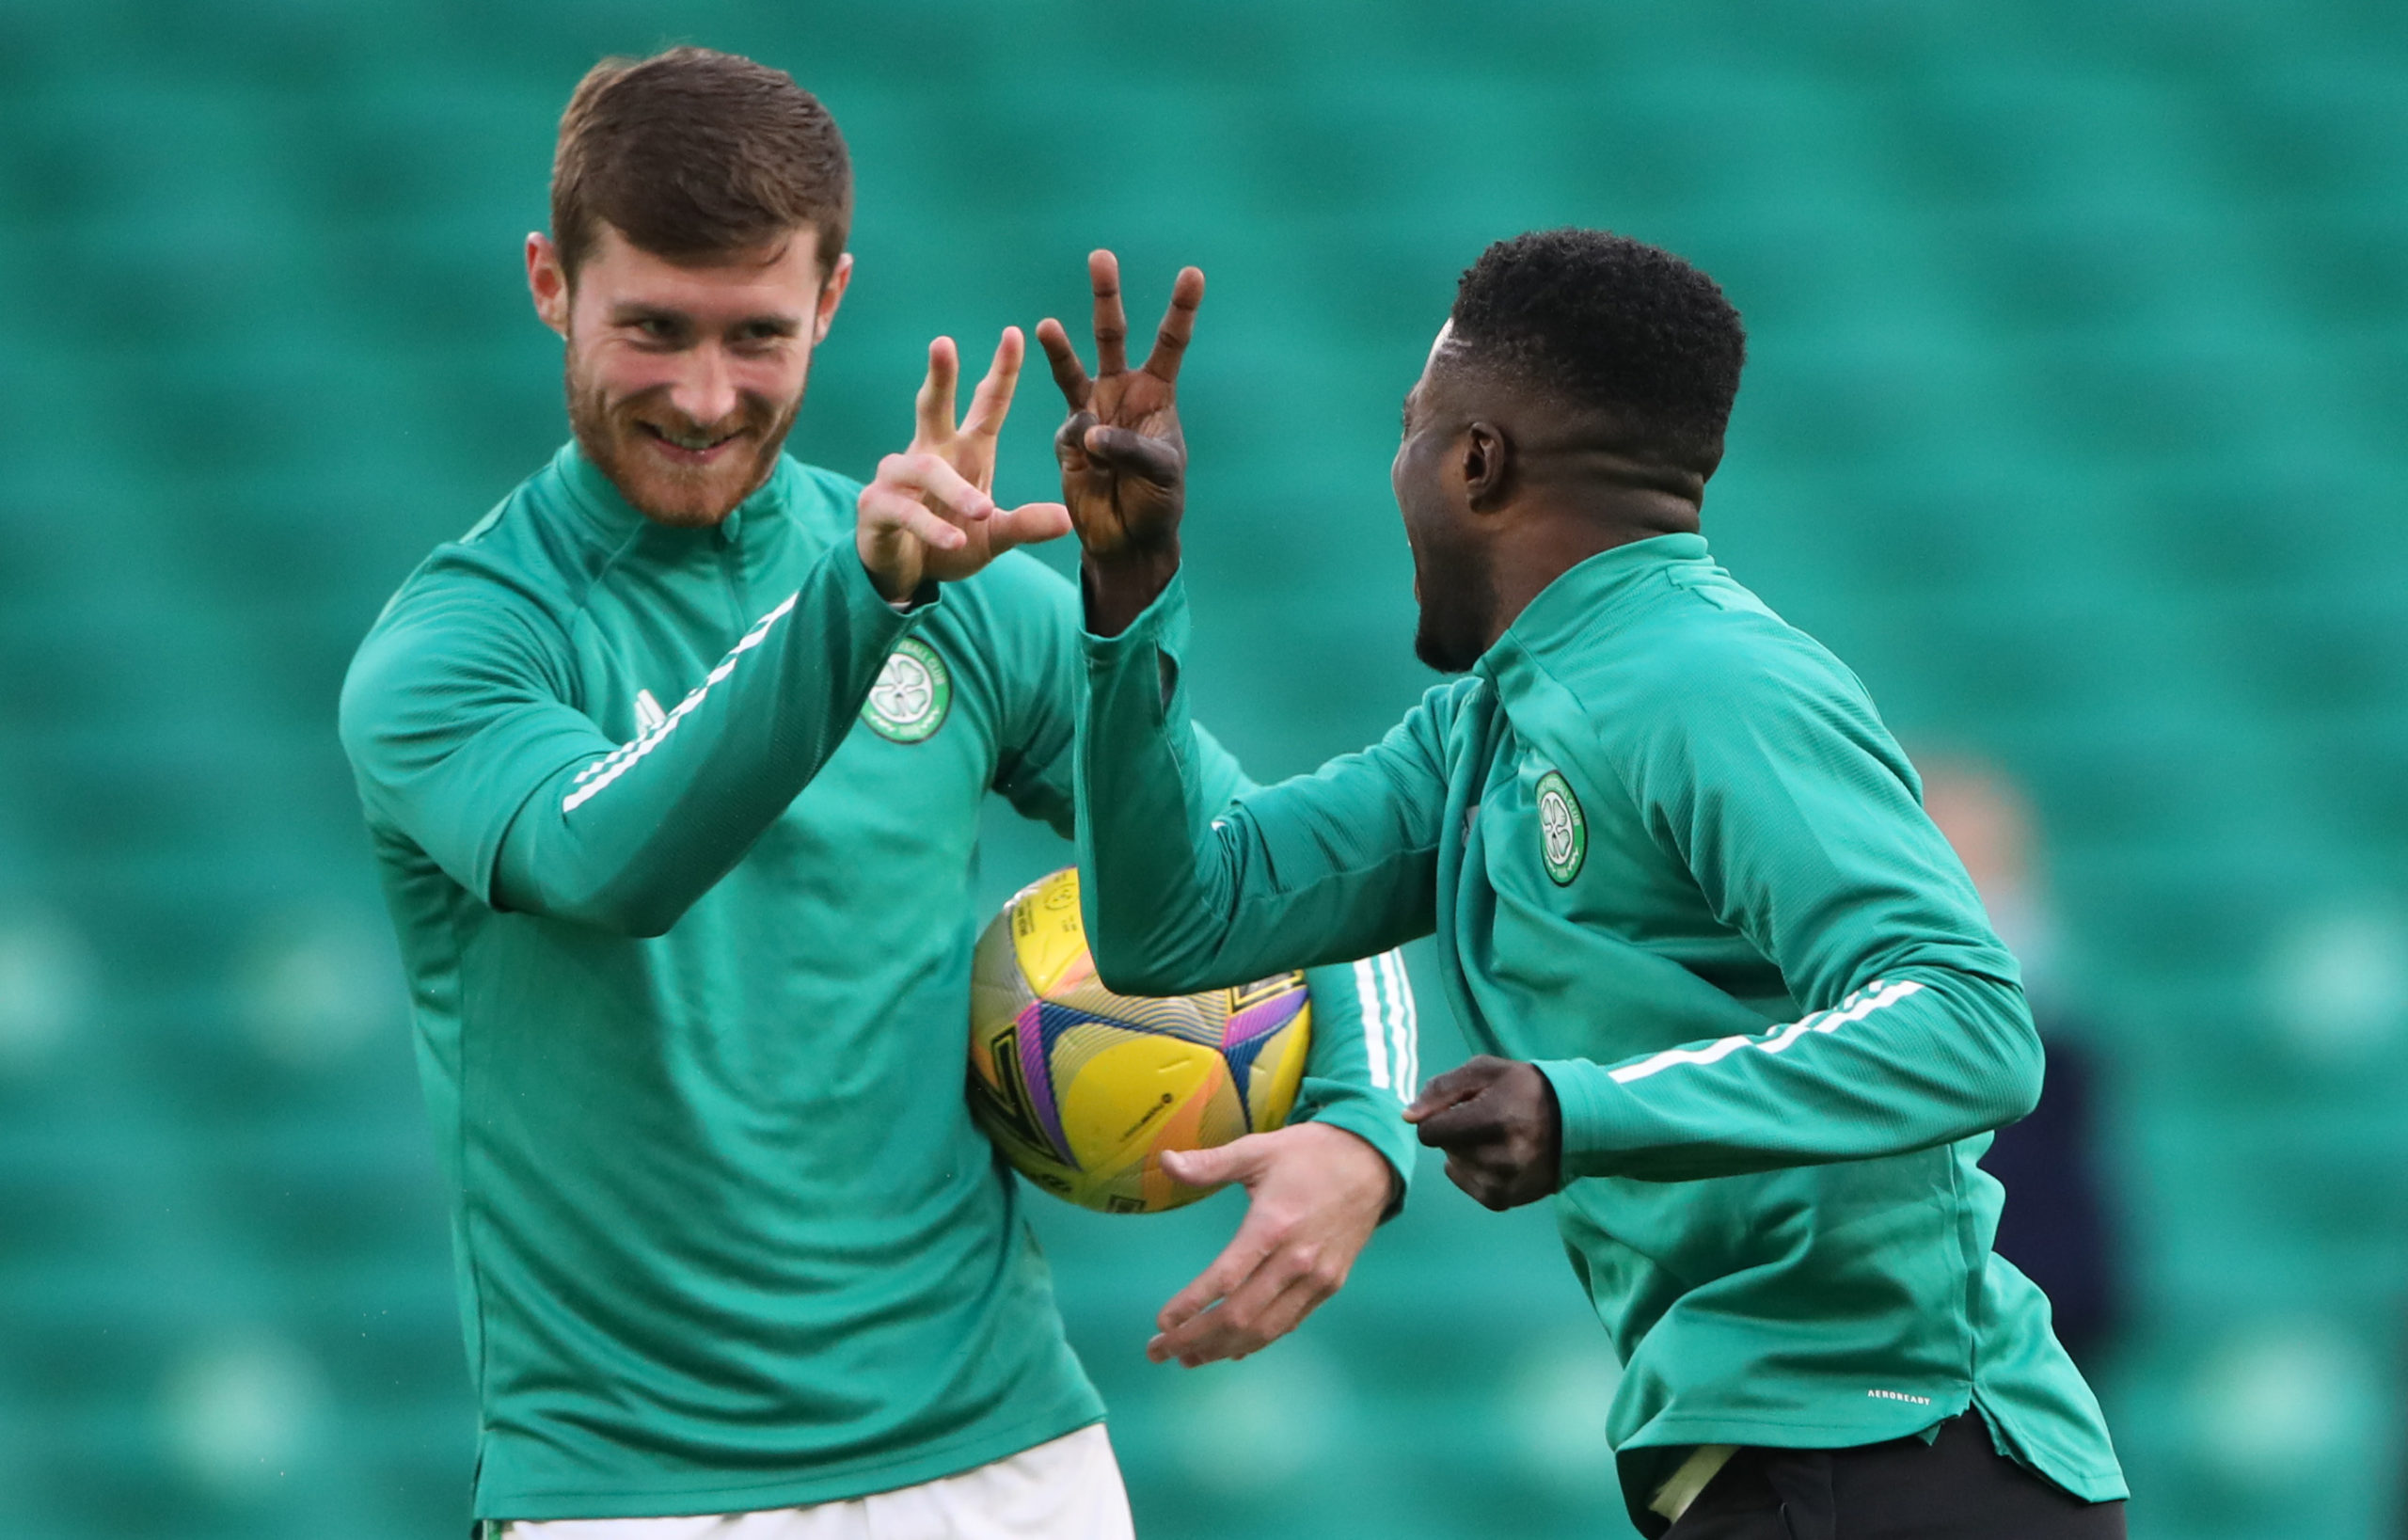 Celtic right-back Anthony Ralston was well worth a Scotland shout on current form